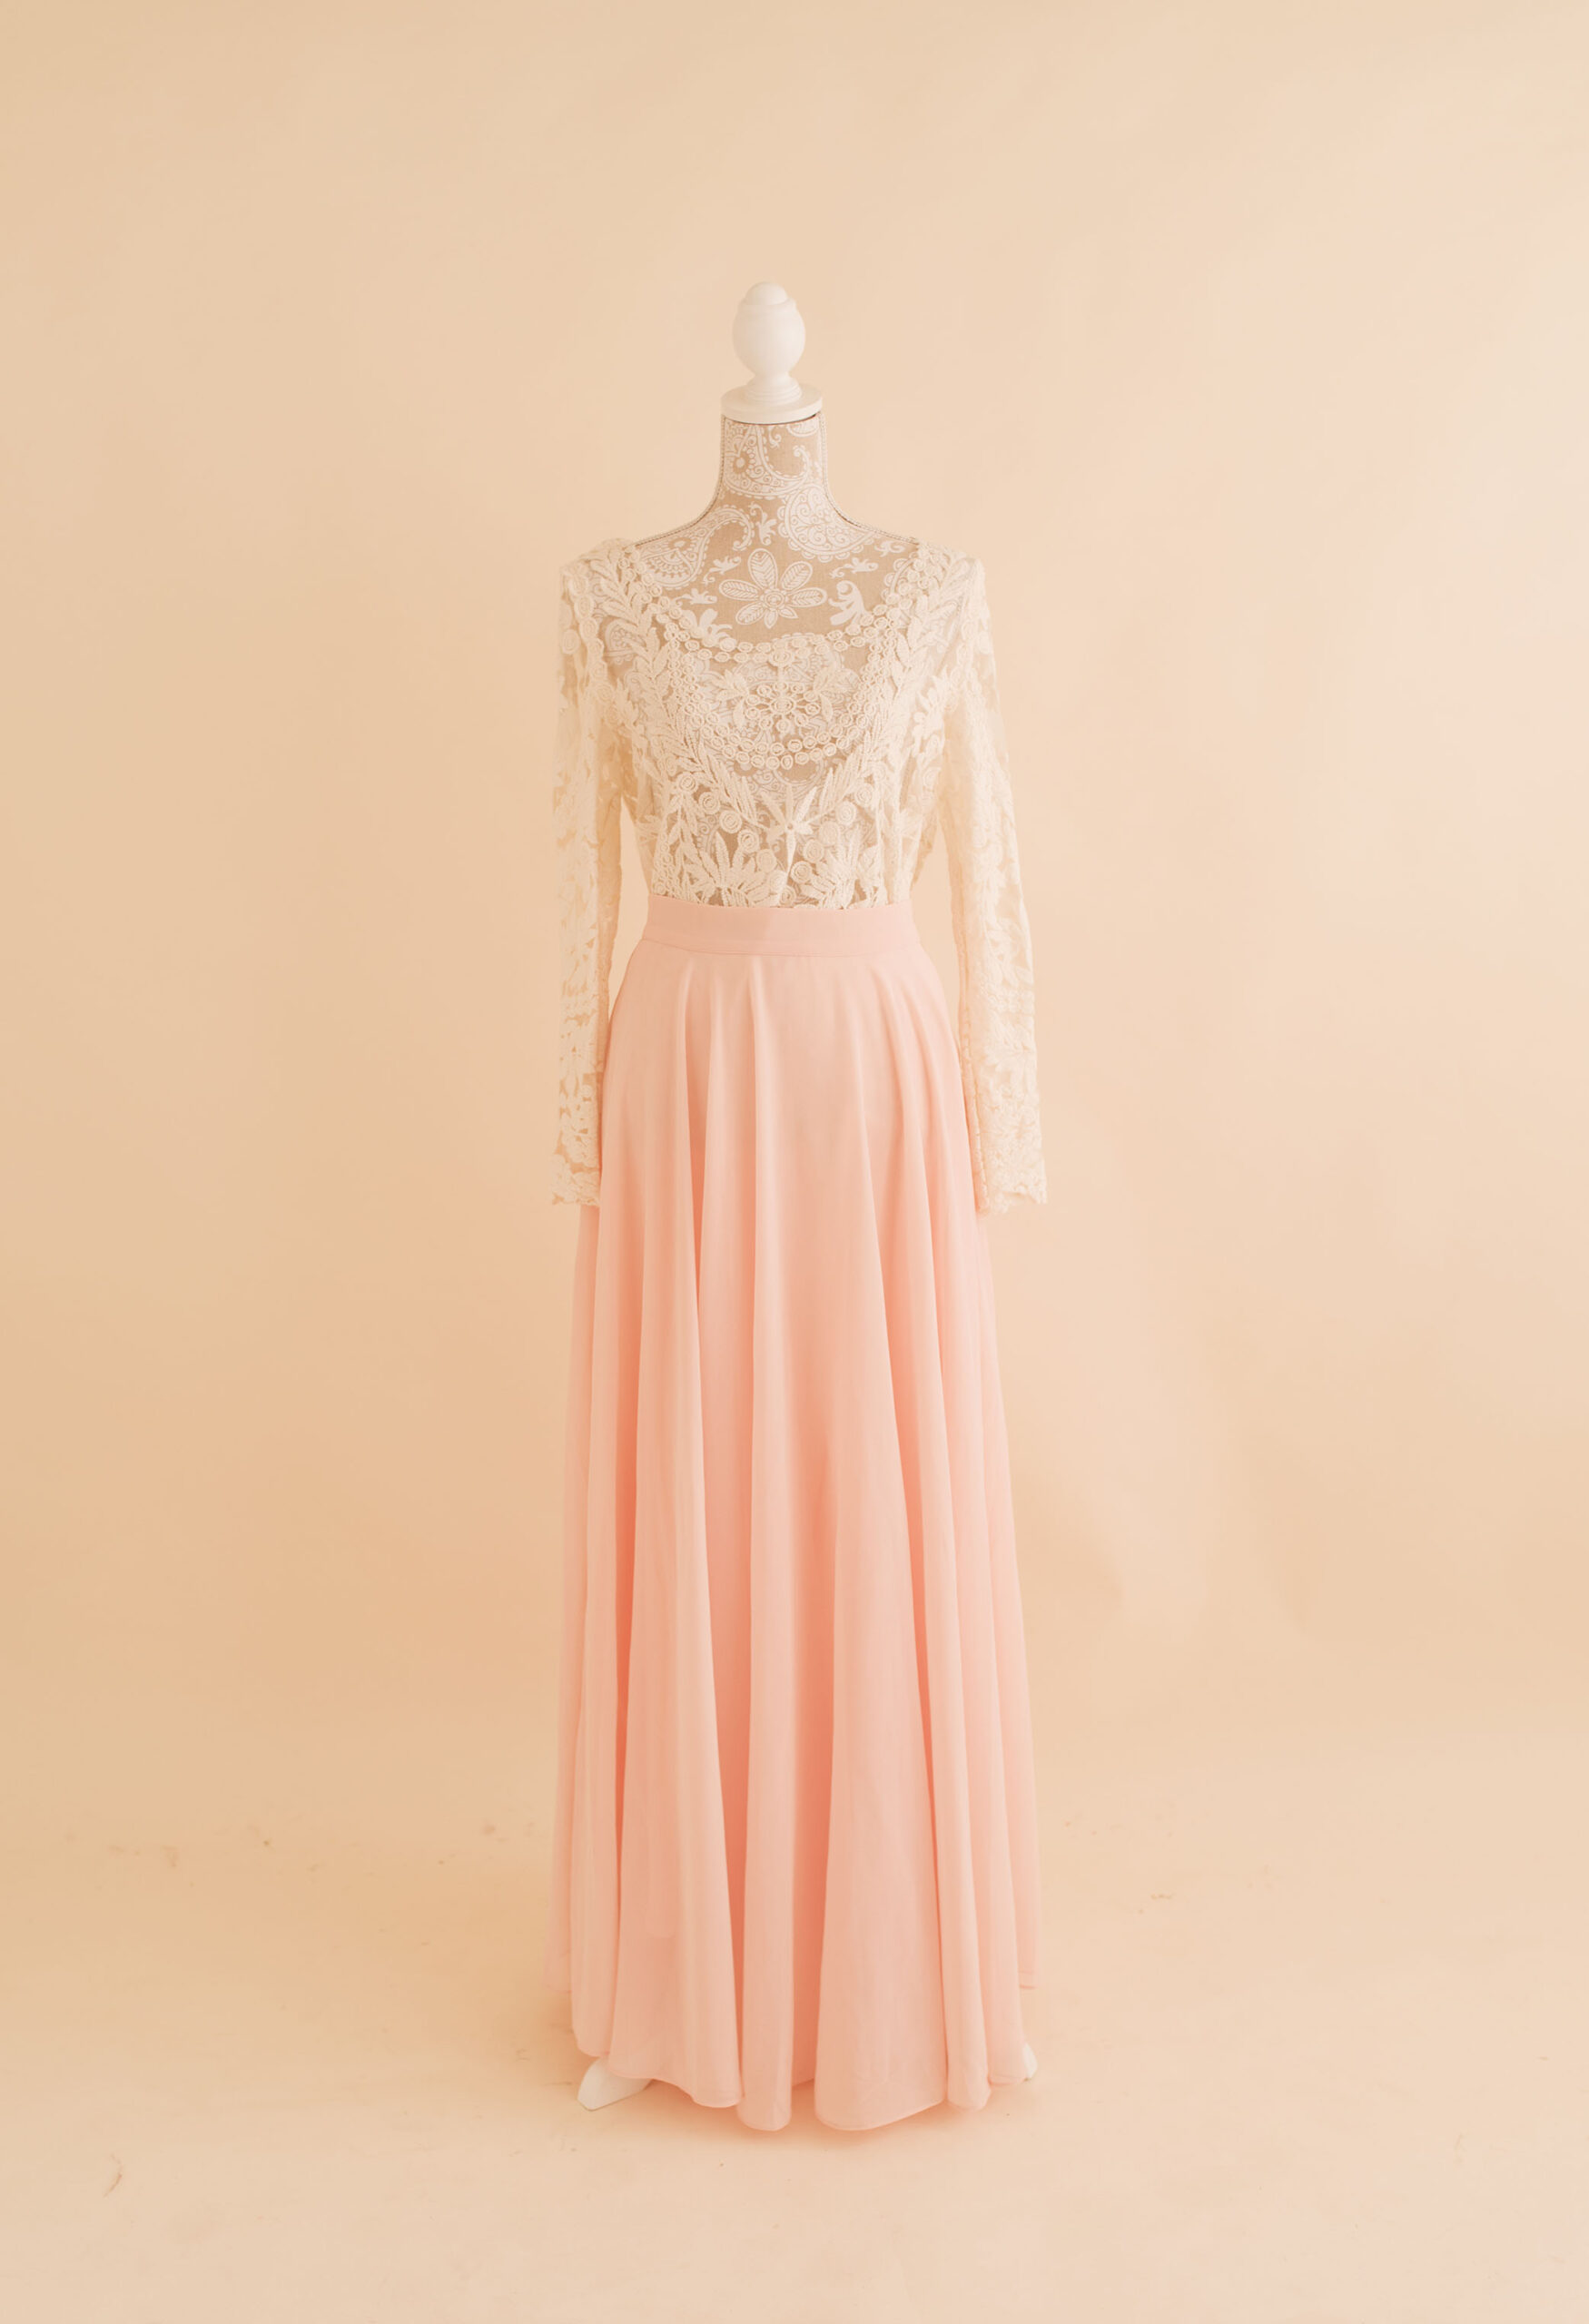 white lace top and pink maxi skirt available in studio wardrobe 